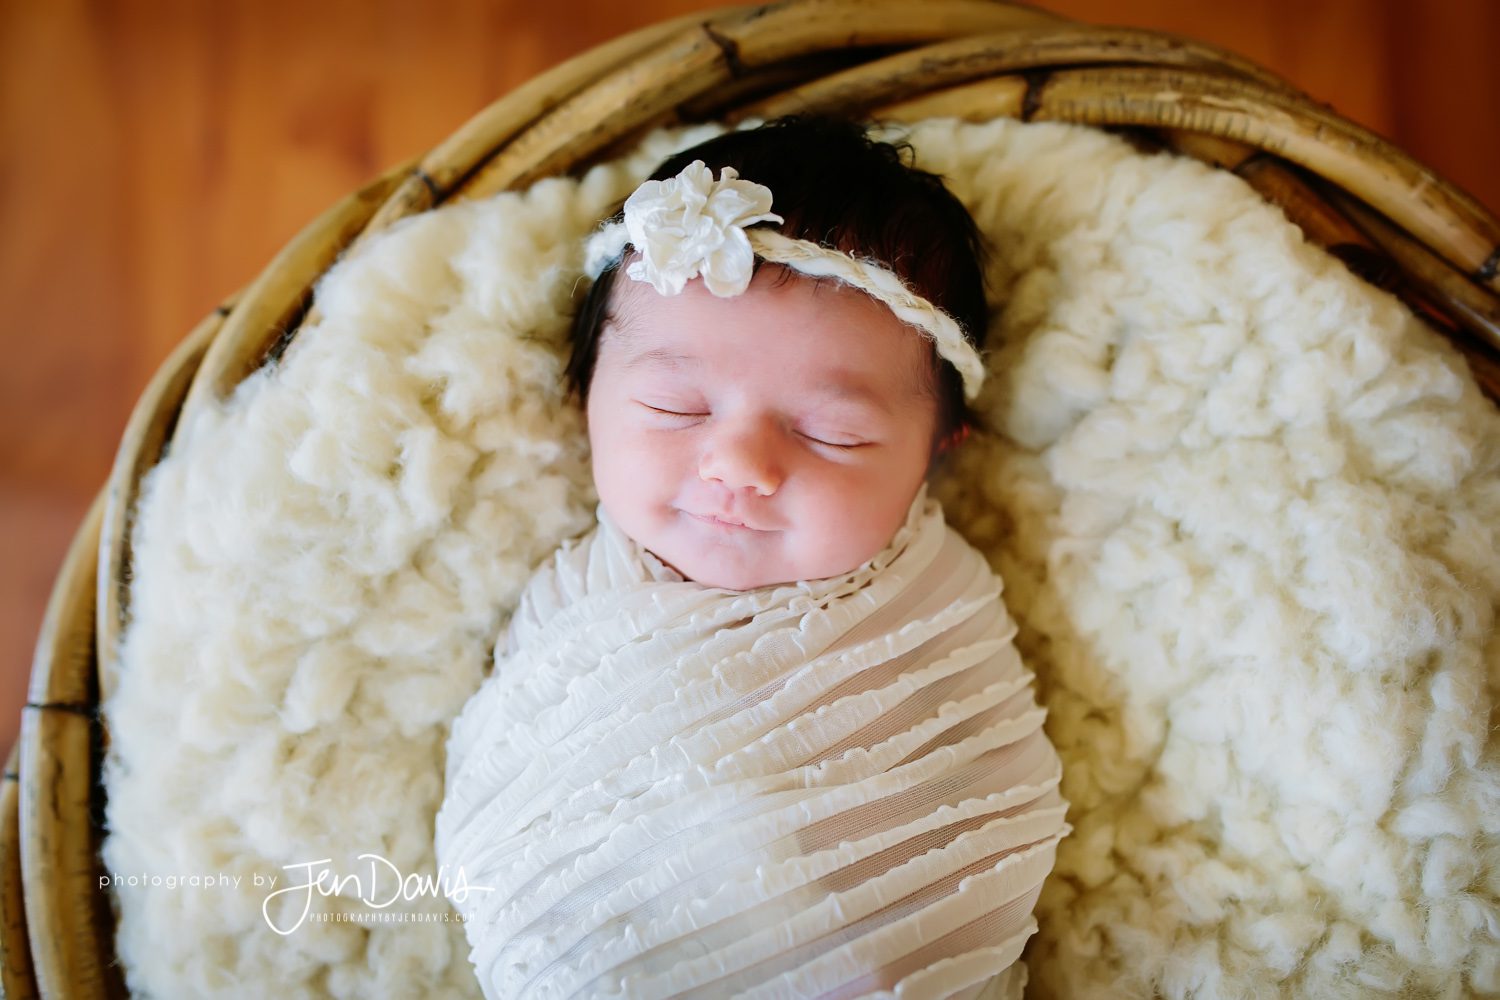 Baby swaddled with cream ruffled blanket in a basket with headband